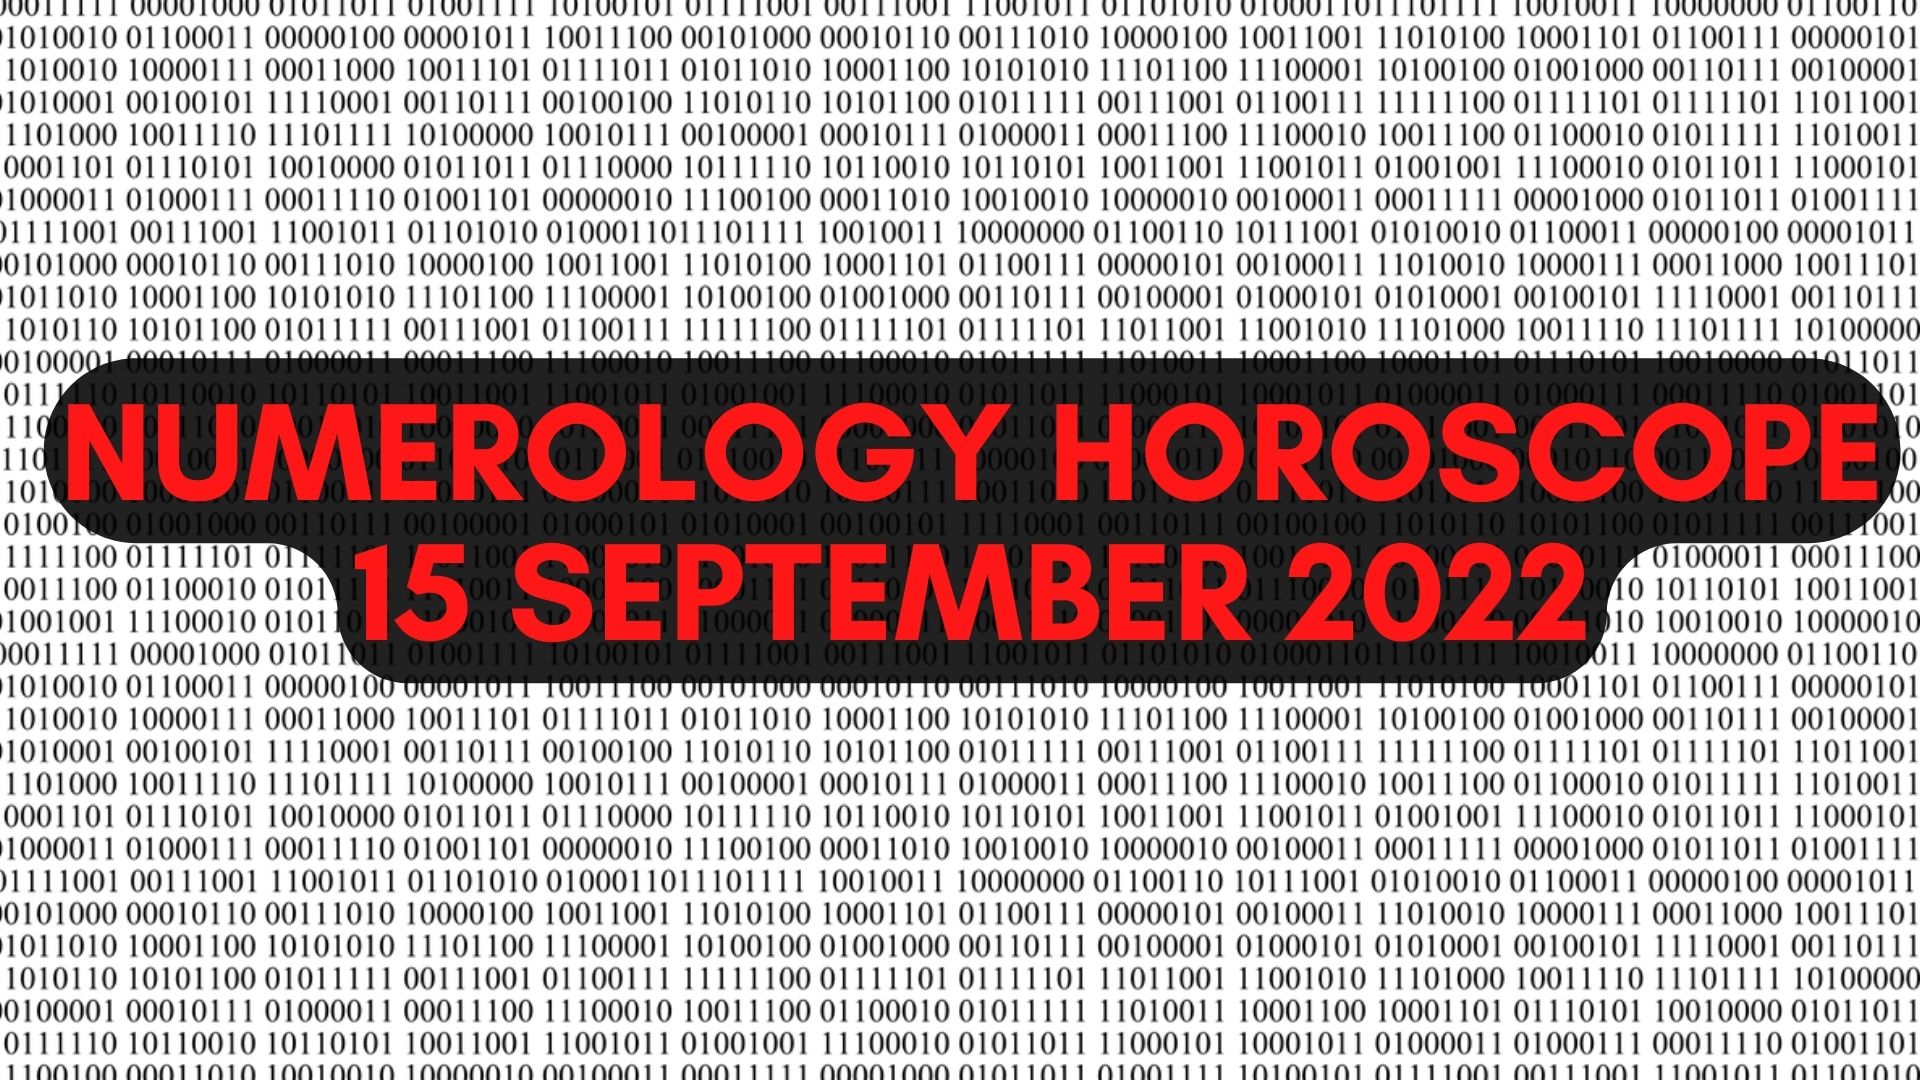 Numerology Horoscope 15 September 2022 - There Are Signs Of Progress